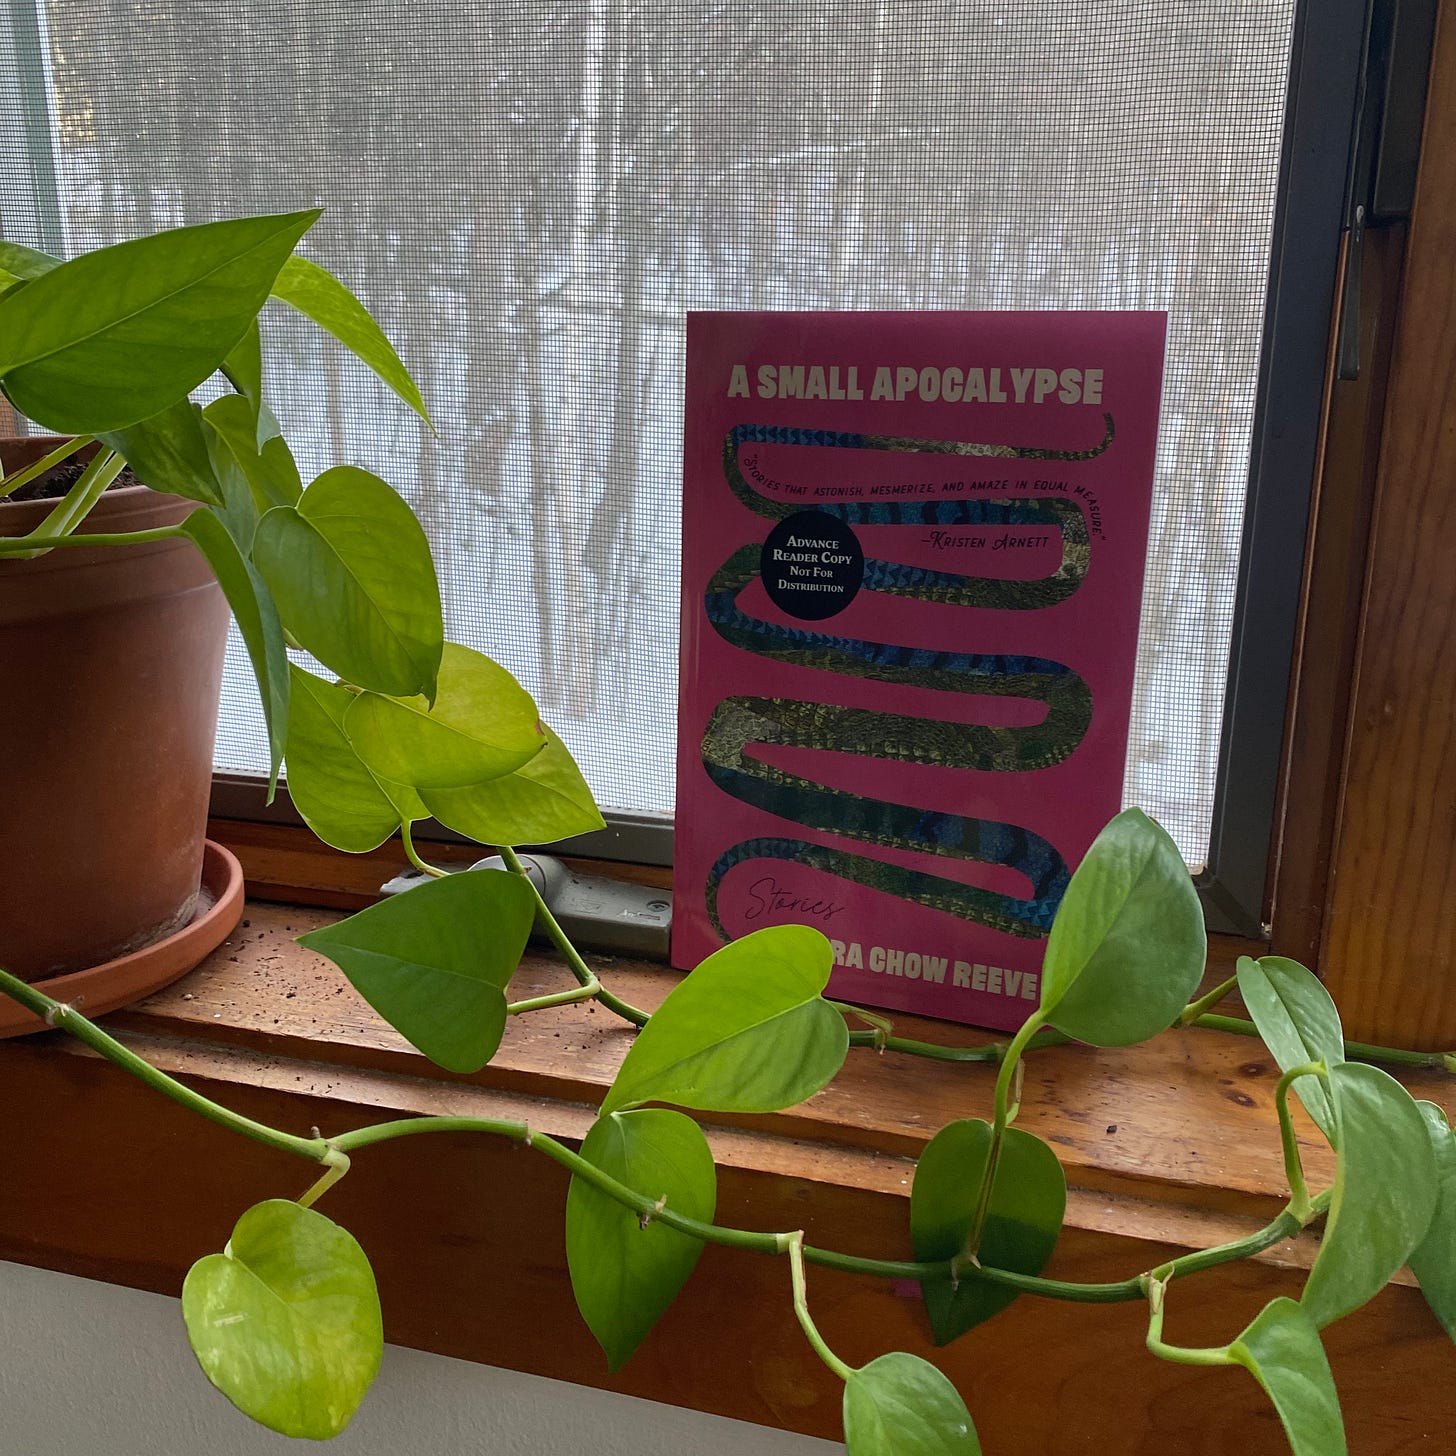 This book propped on a windowsill next to a viney plant.